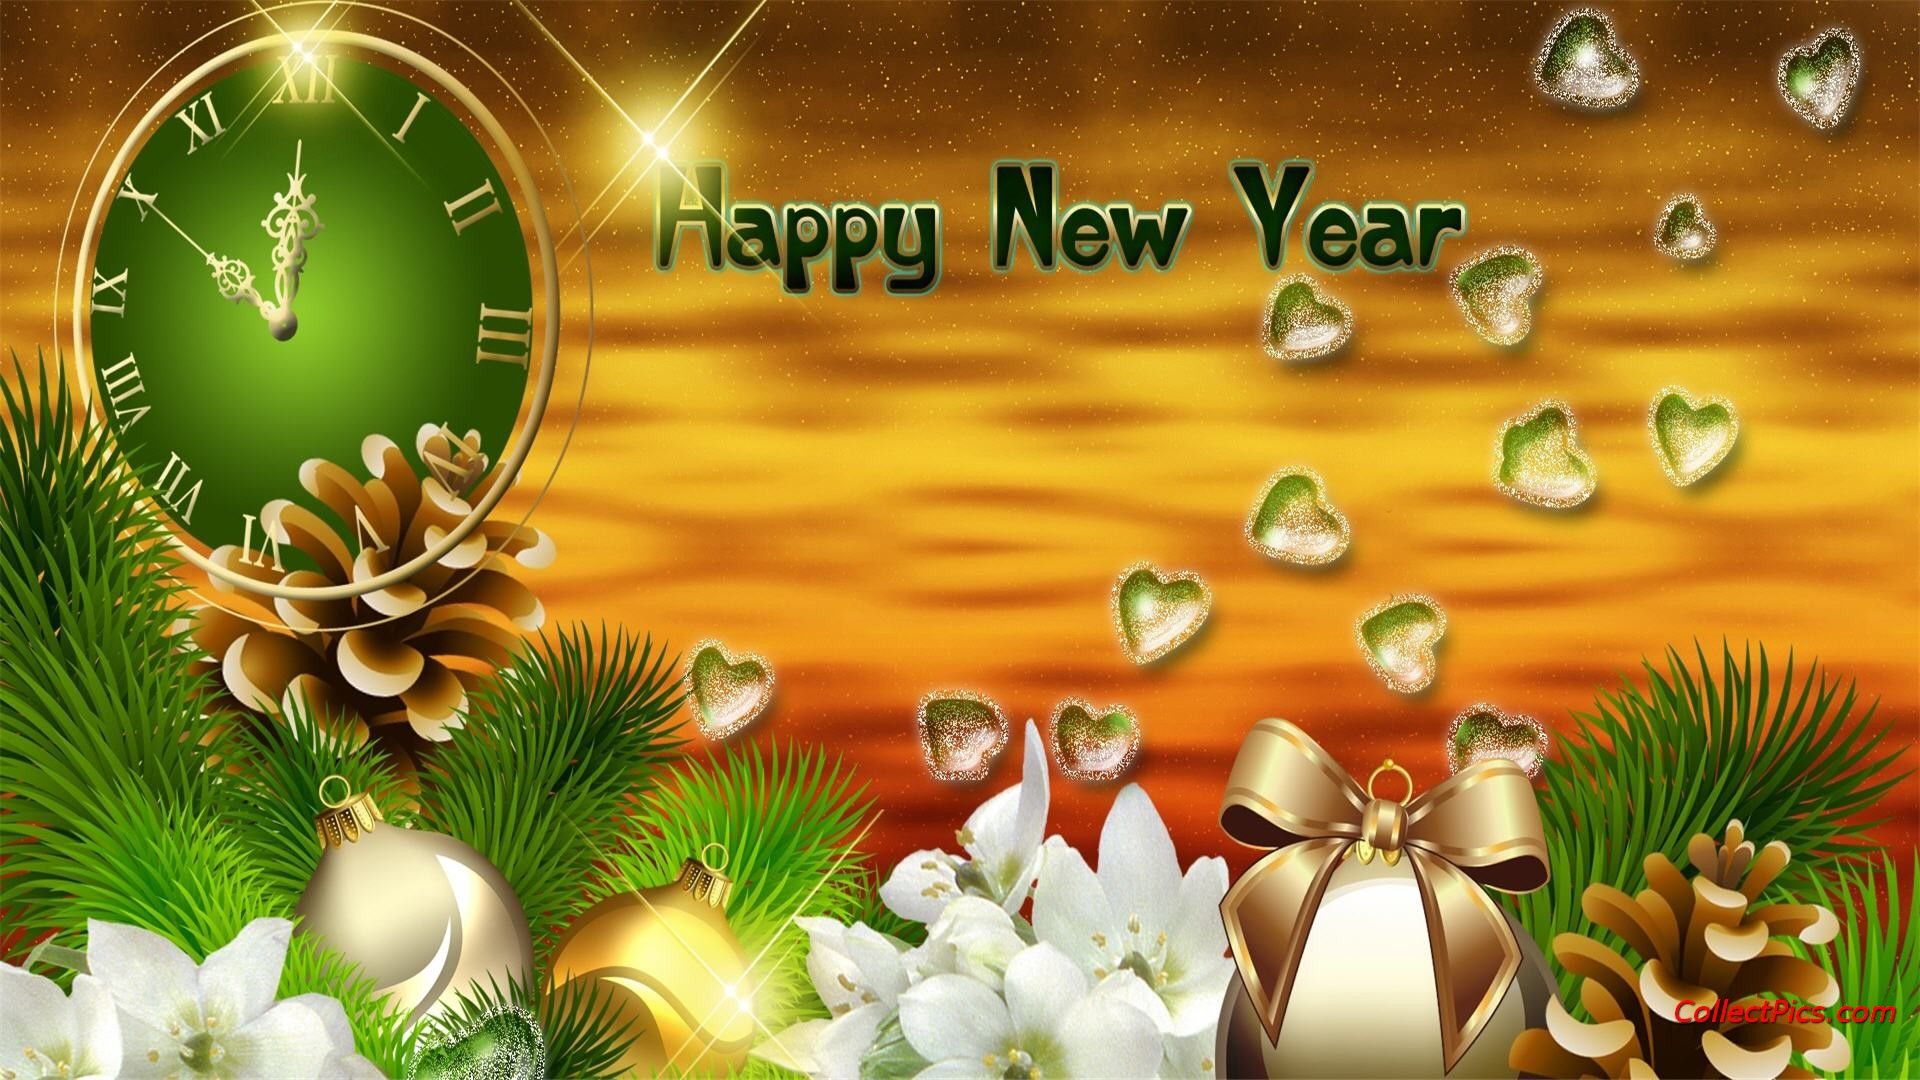 2016 free happy New Year wallpaper - images, photos, pictures, pics